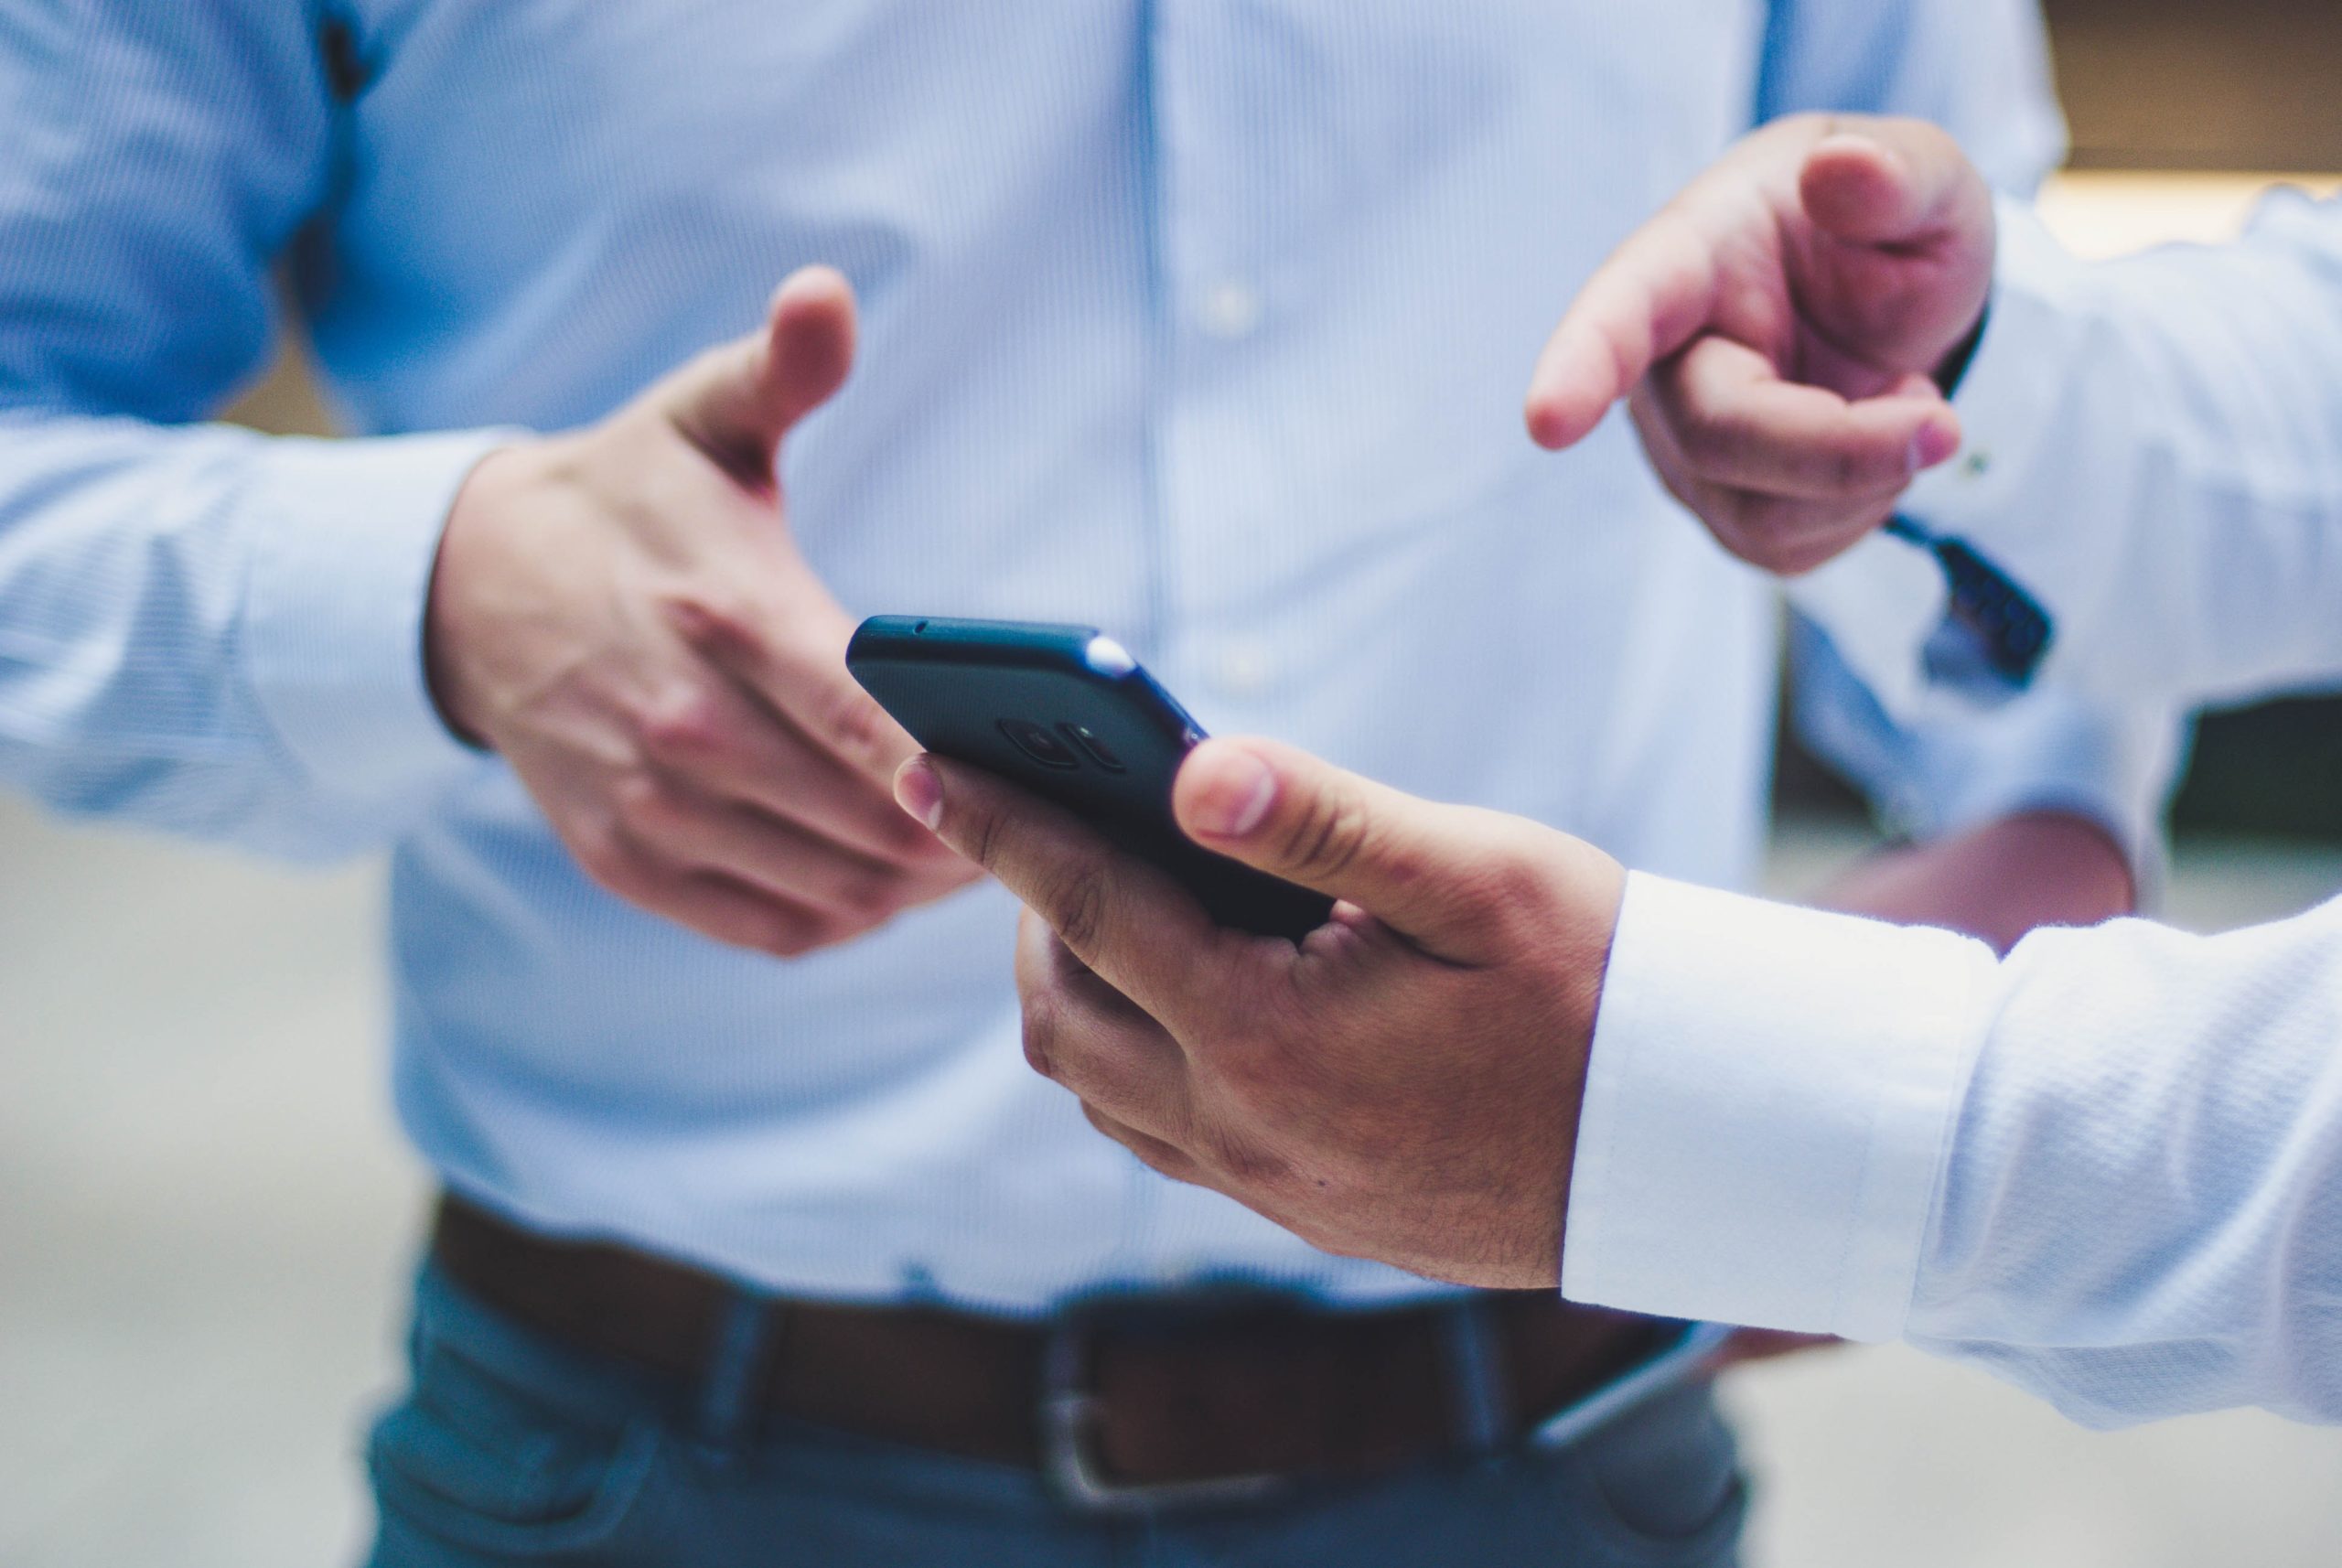 5 Top Tips for a Successful BYOD Policy for Small Businesses